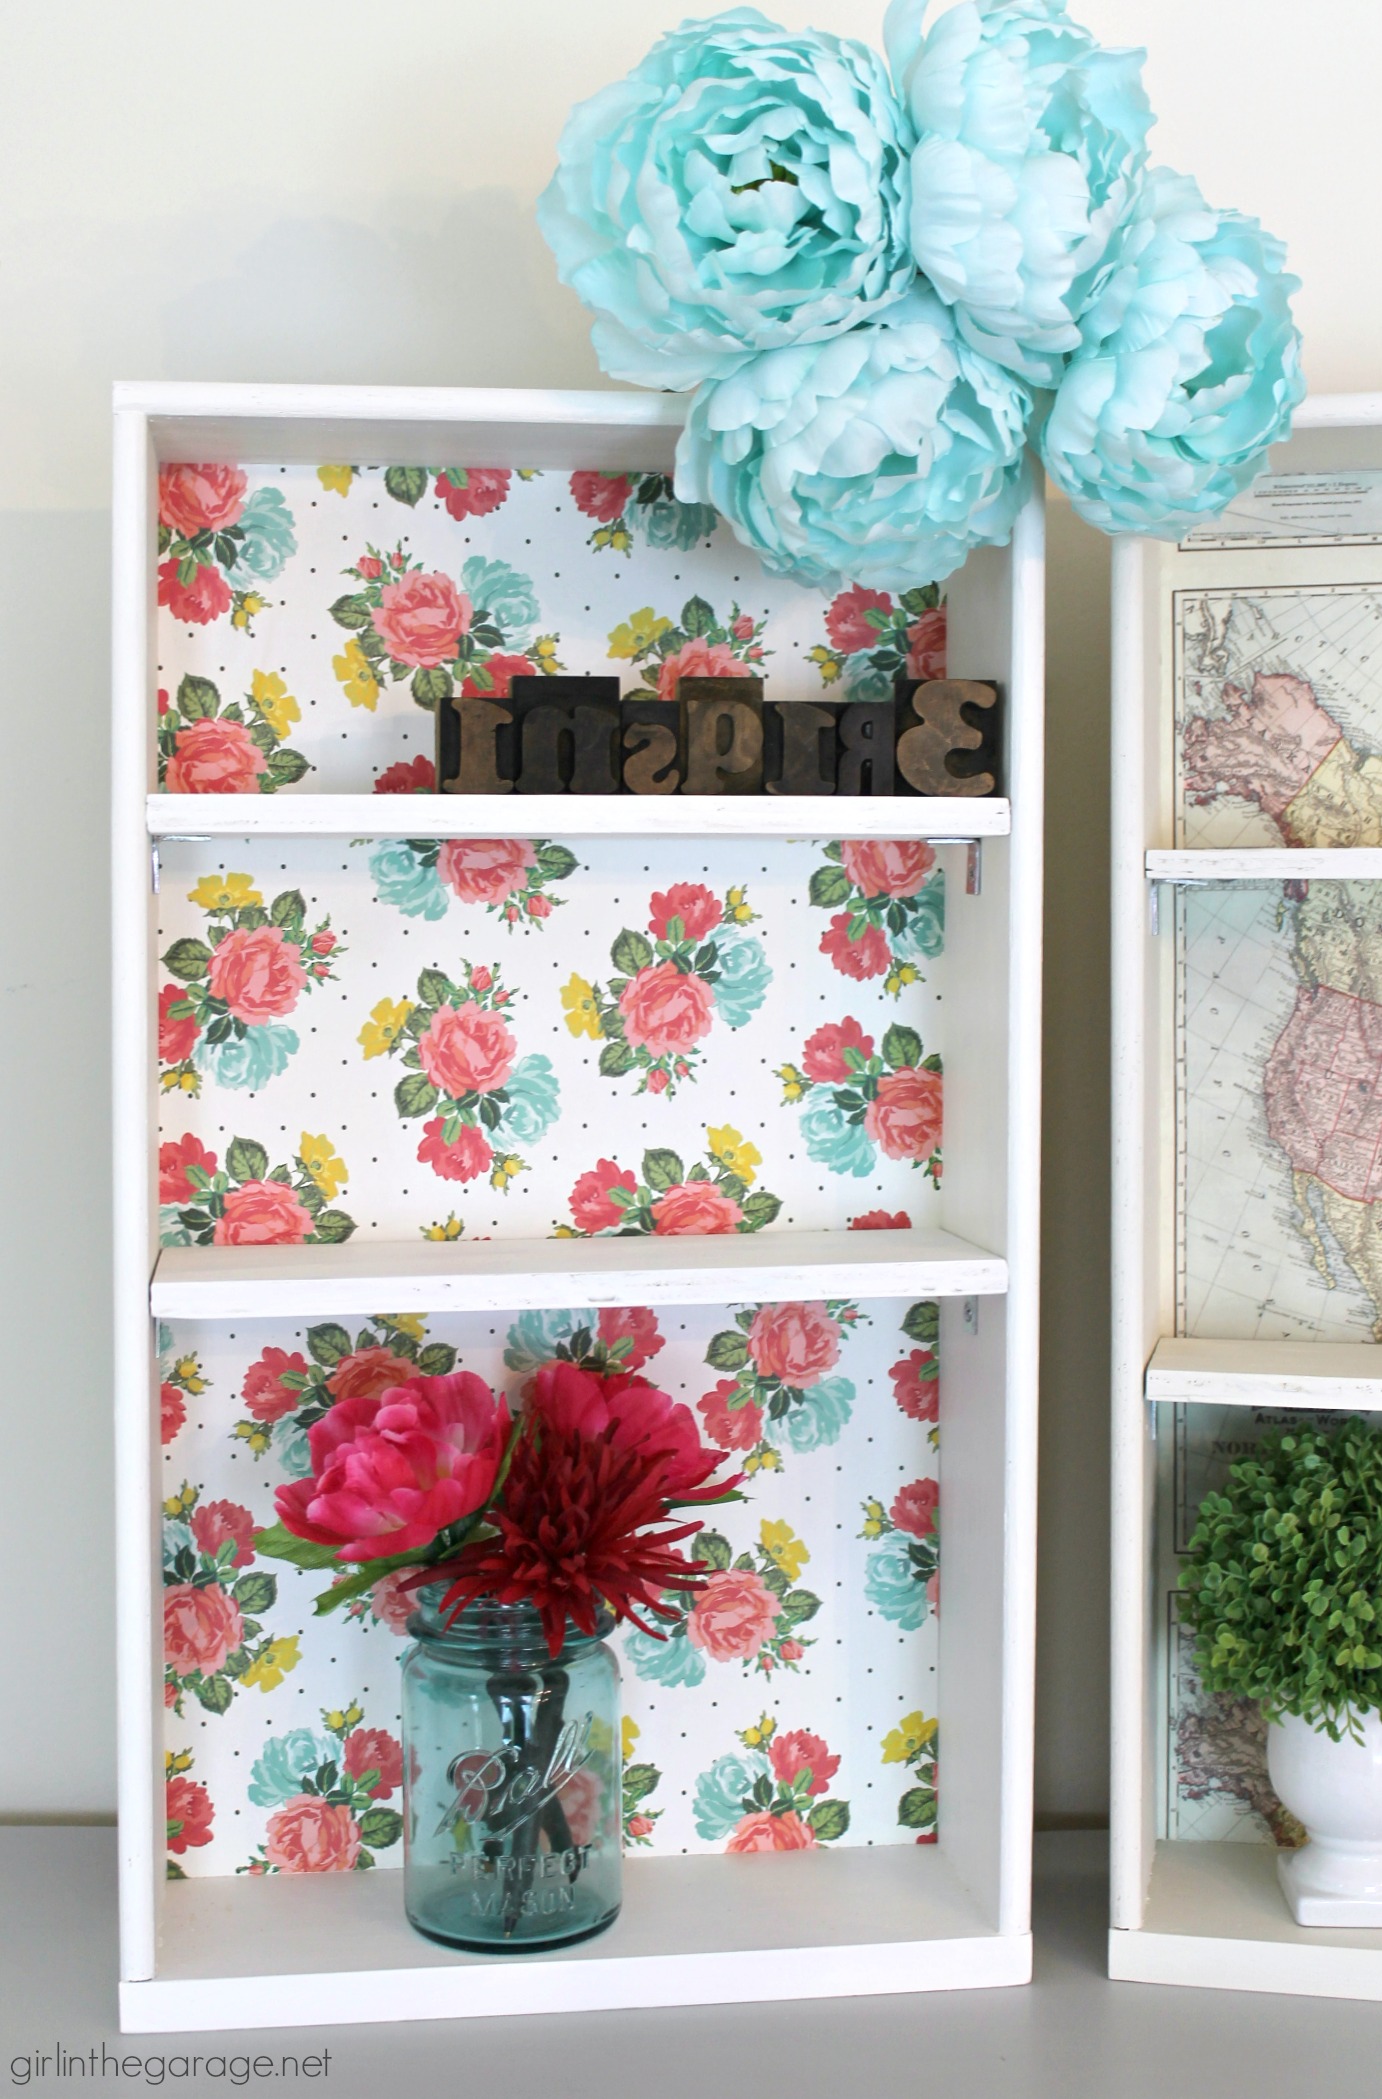 Creative upcycled drawers ideas - Girl in the Garage